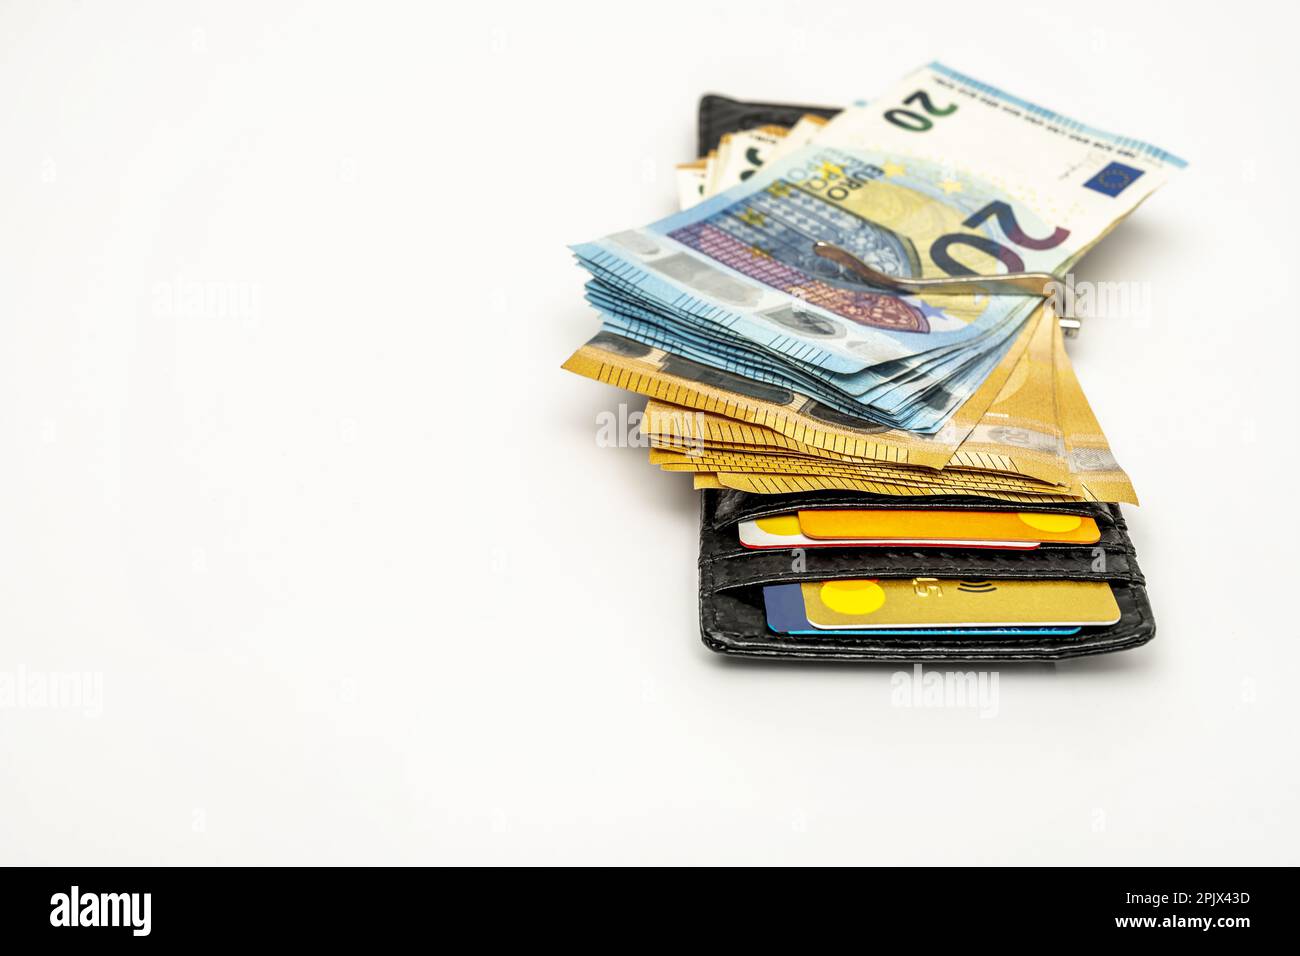 Black men's wallet with a good amount of euro bills, credit cards and a money clip Stock Photo